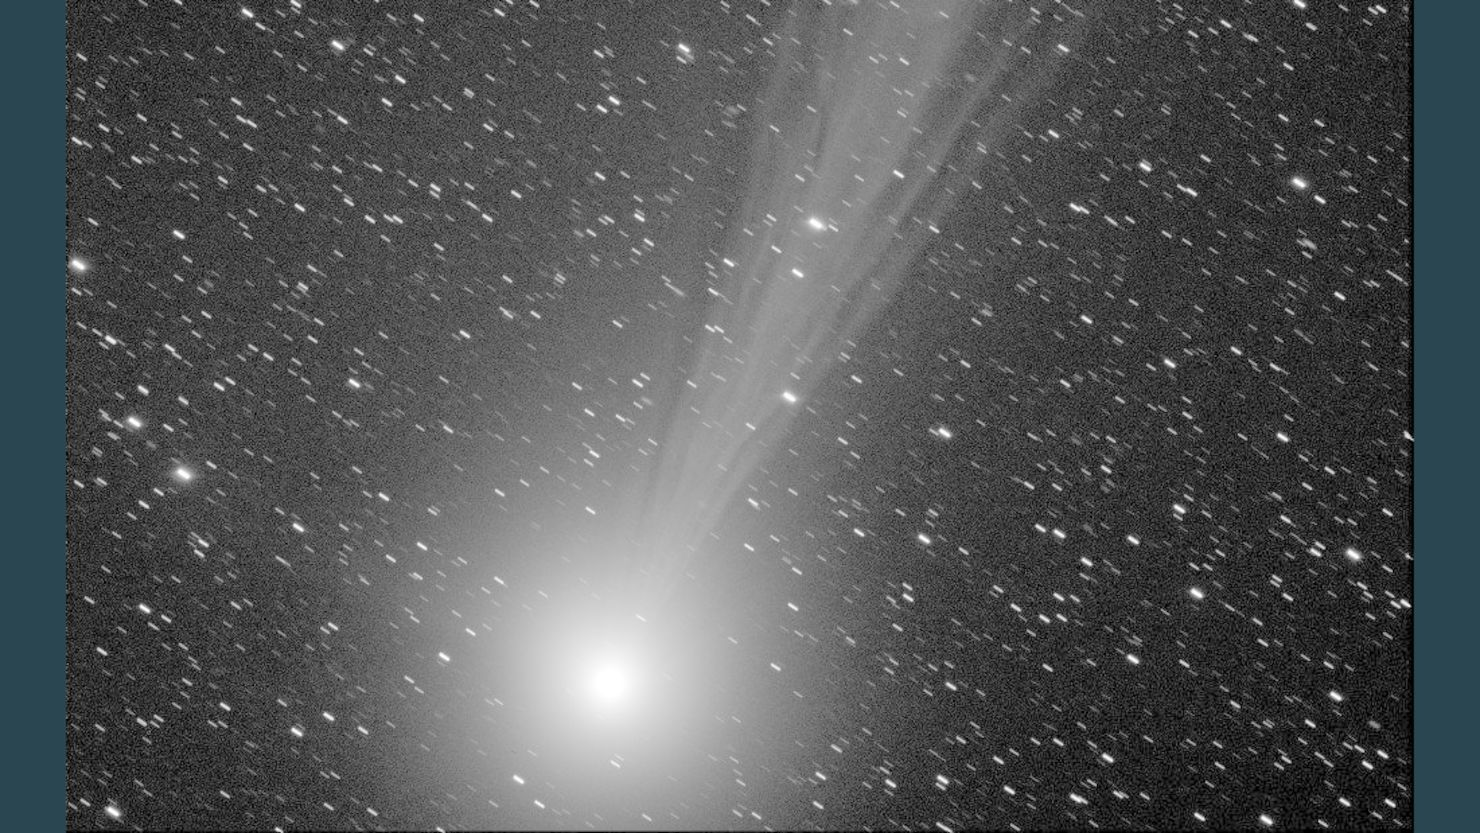 Comet Lovejoy was discovered on August 17, 2014 by Terry Lovejoy in Brisbane, Queensland, Australia.